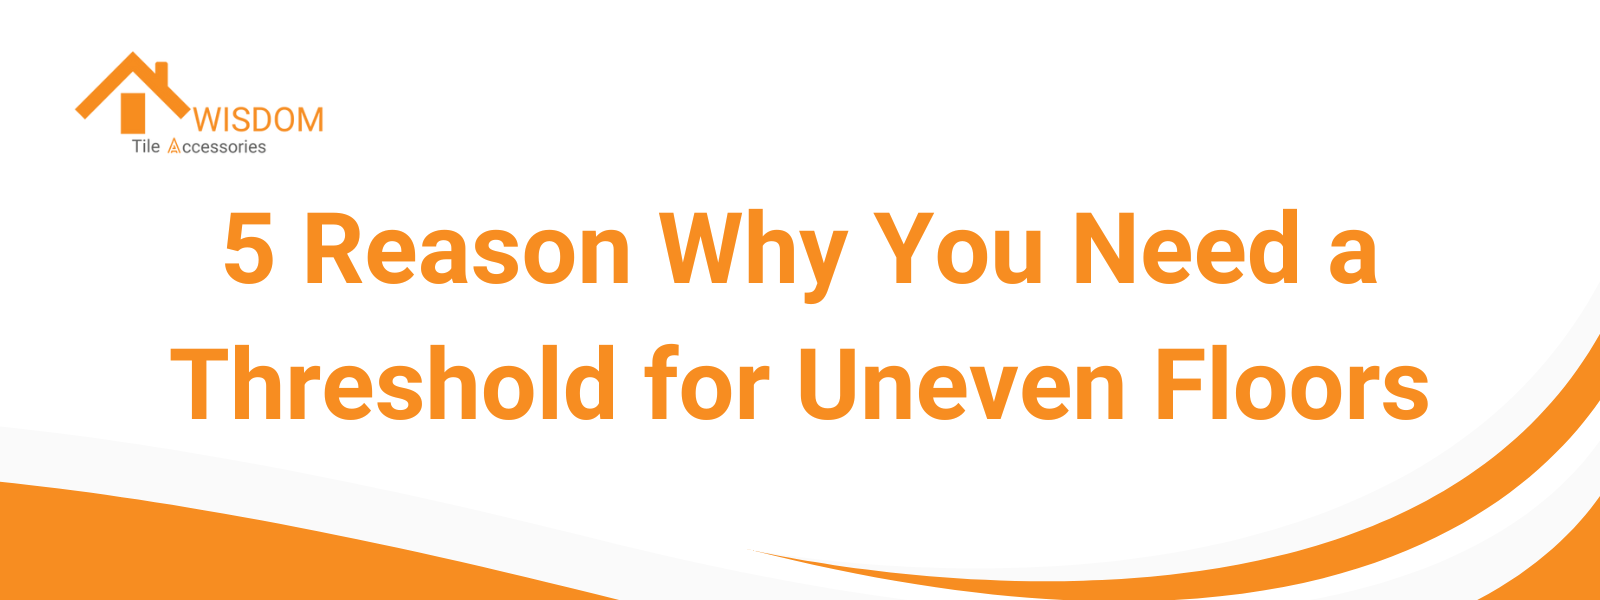 5 Reason Why You Need a Threshold for Uneven Floors